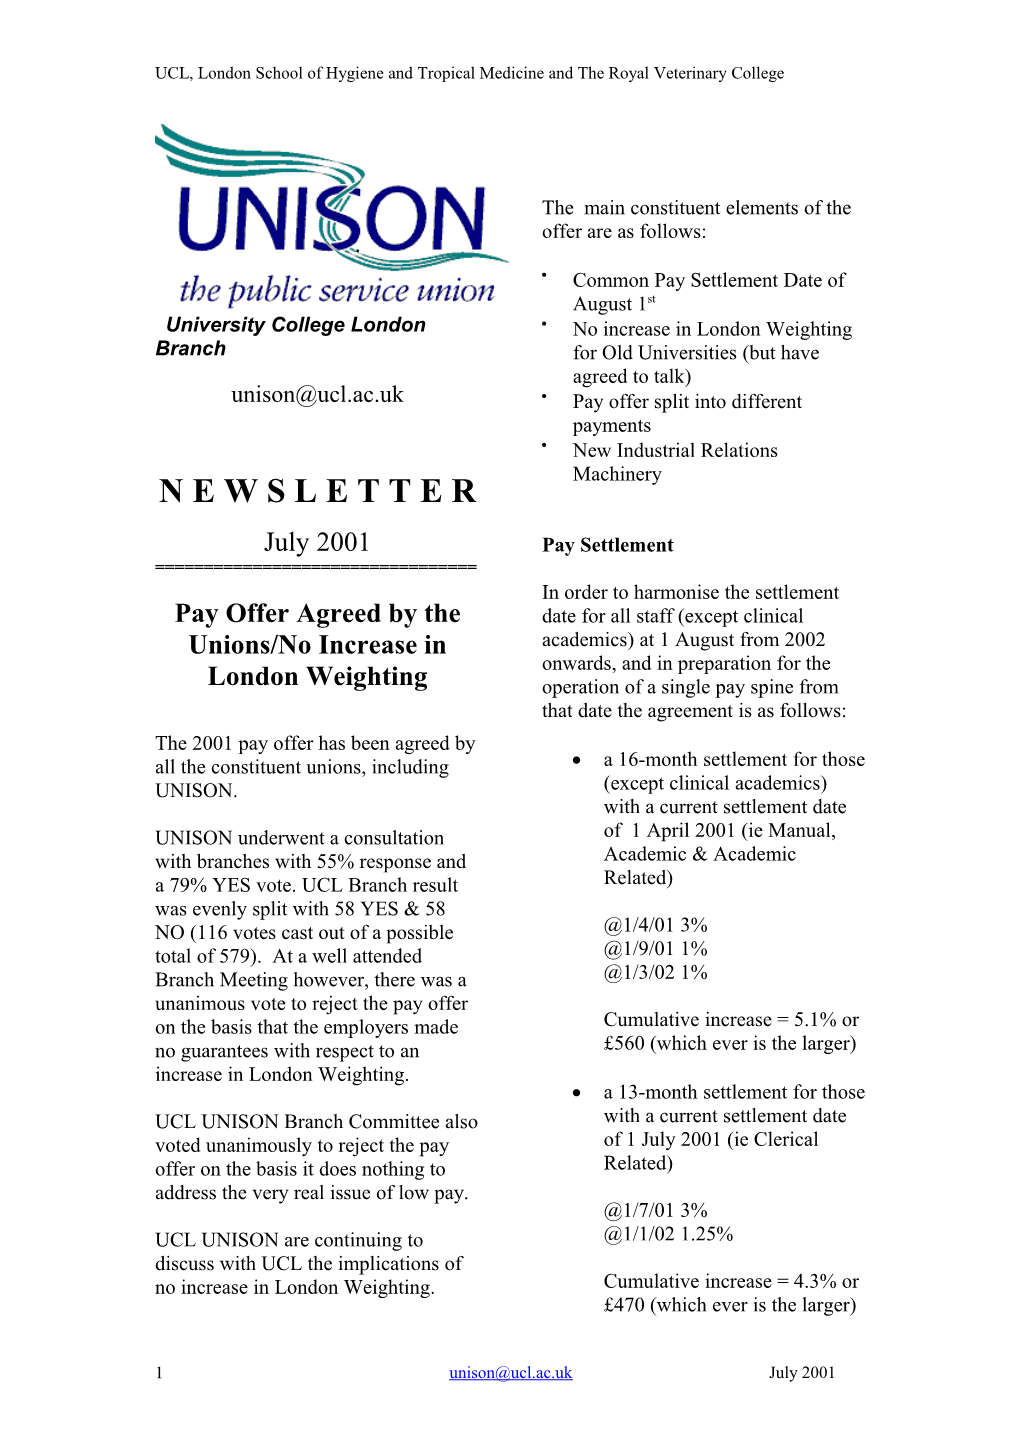 Pay Offer Agreed by the Unions/No Increase in London Weighting